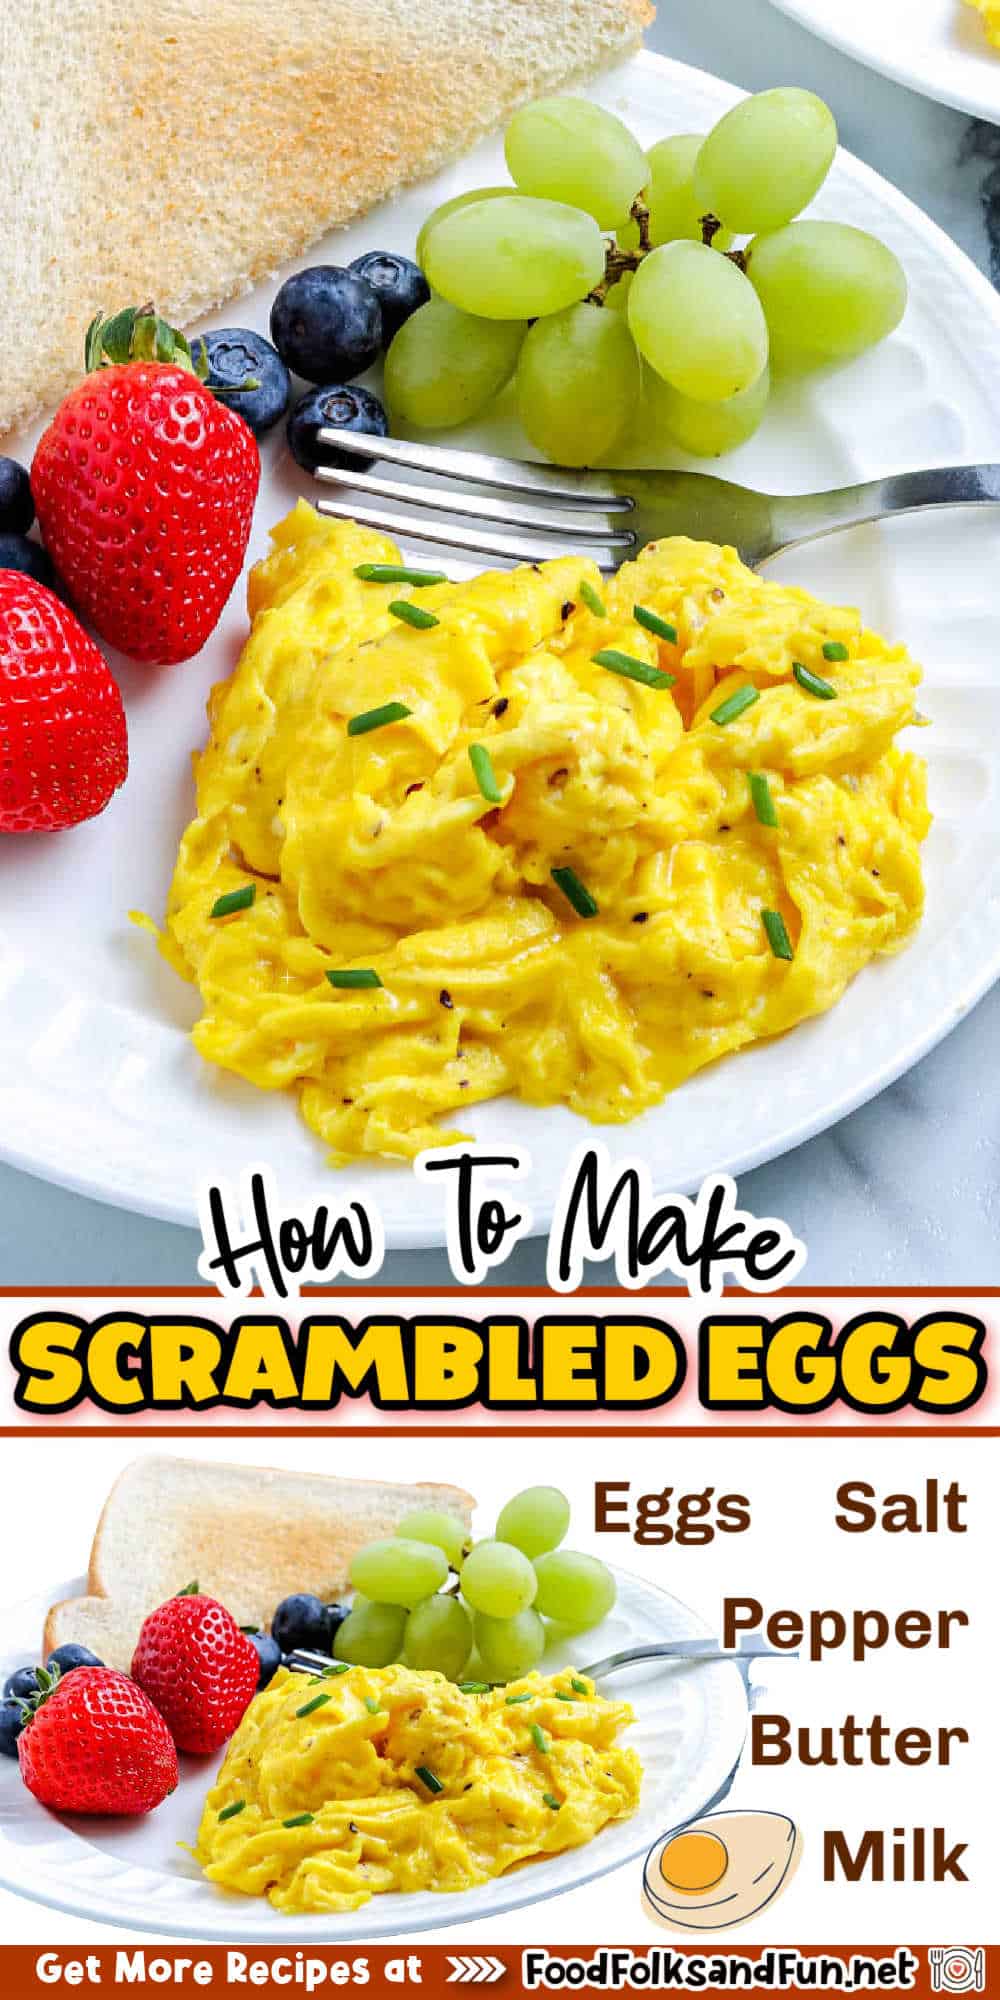 Making scrambled eggs is simple. Making this soft and fluffy breakfast staple takes just a few minutes and five simple ingredients: eggs, salt, pepper, milk, and butter.  via @foodfolksandfun